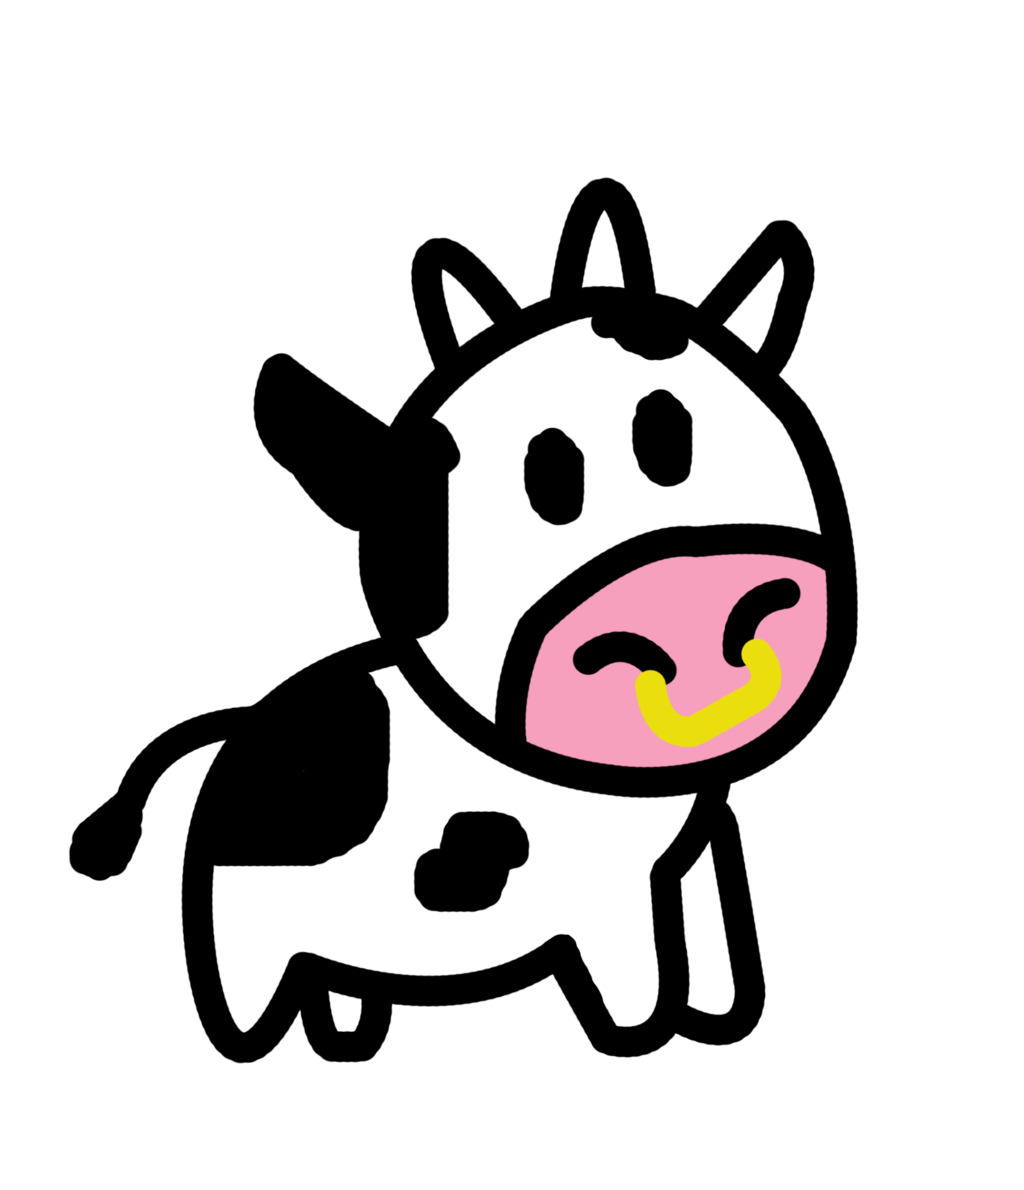 Cartoon Cow Images - Cliparts.co